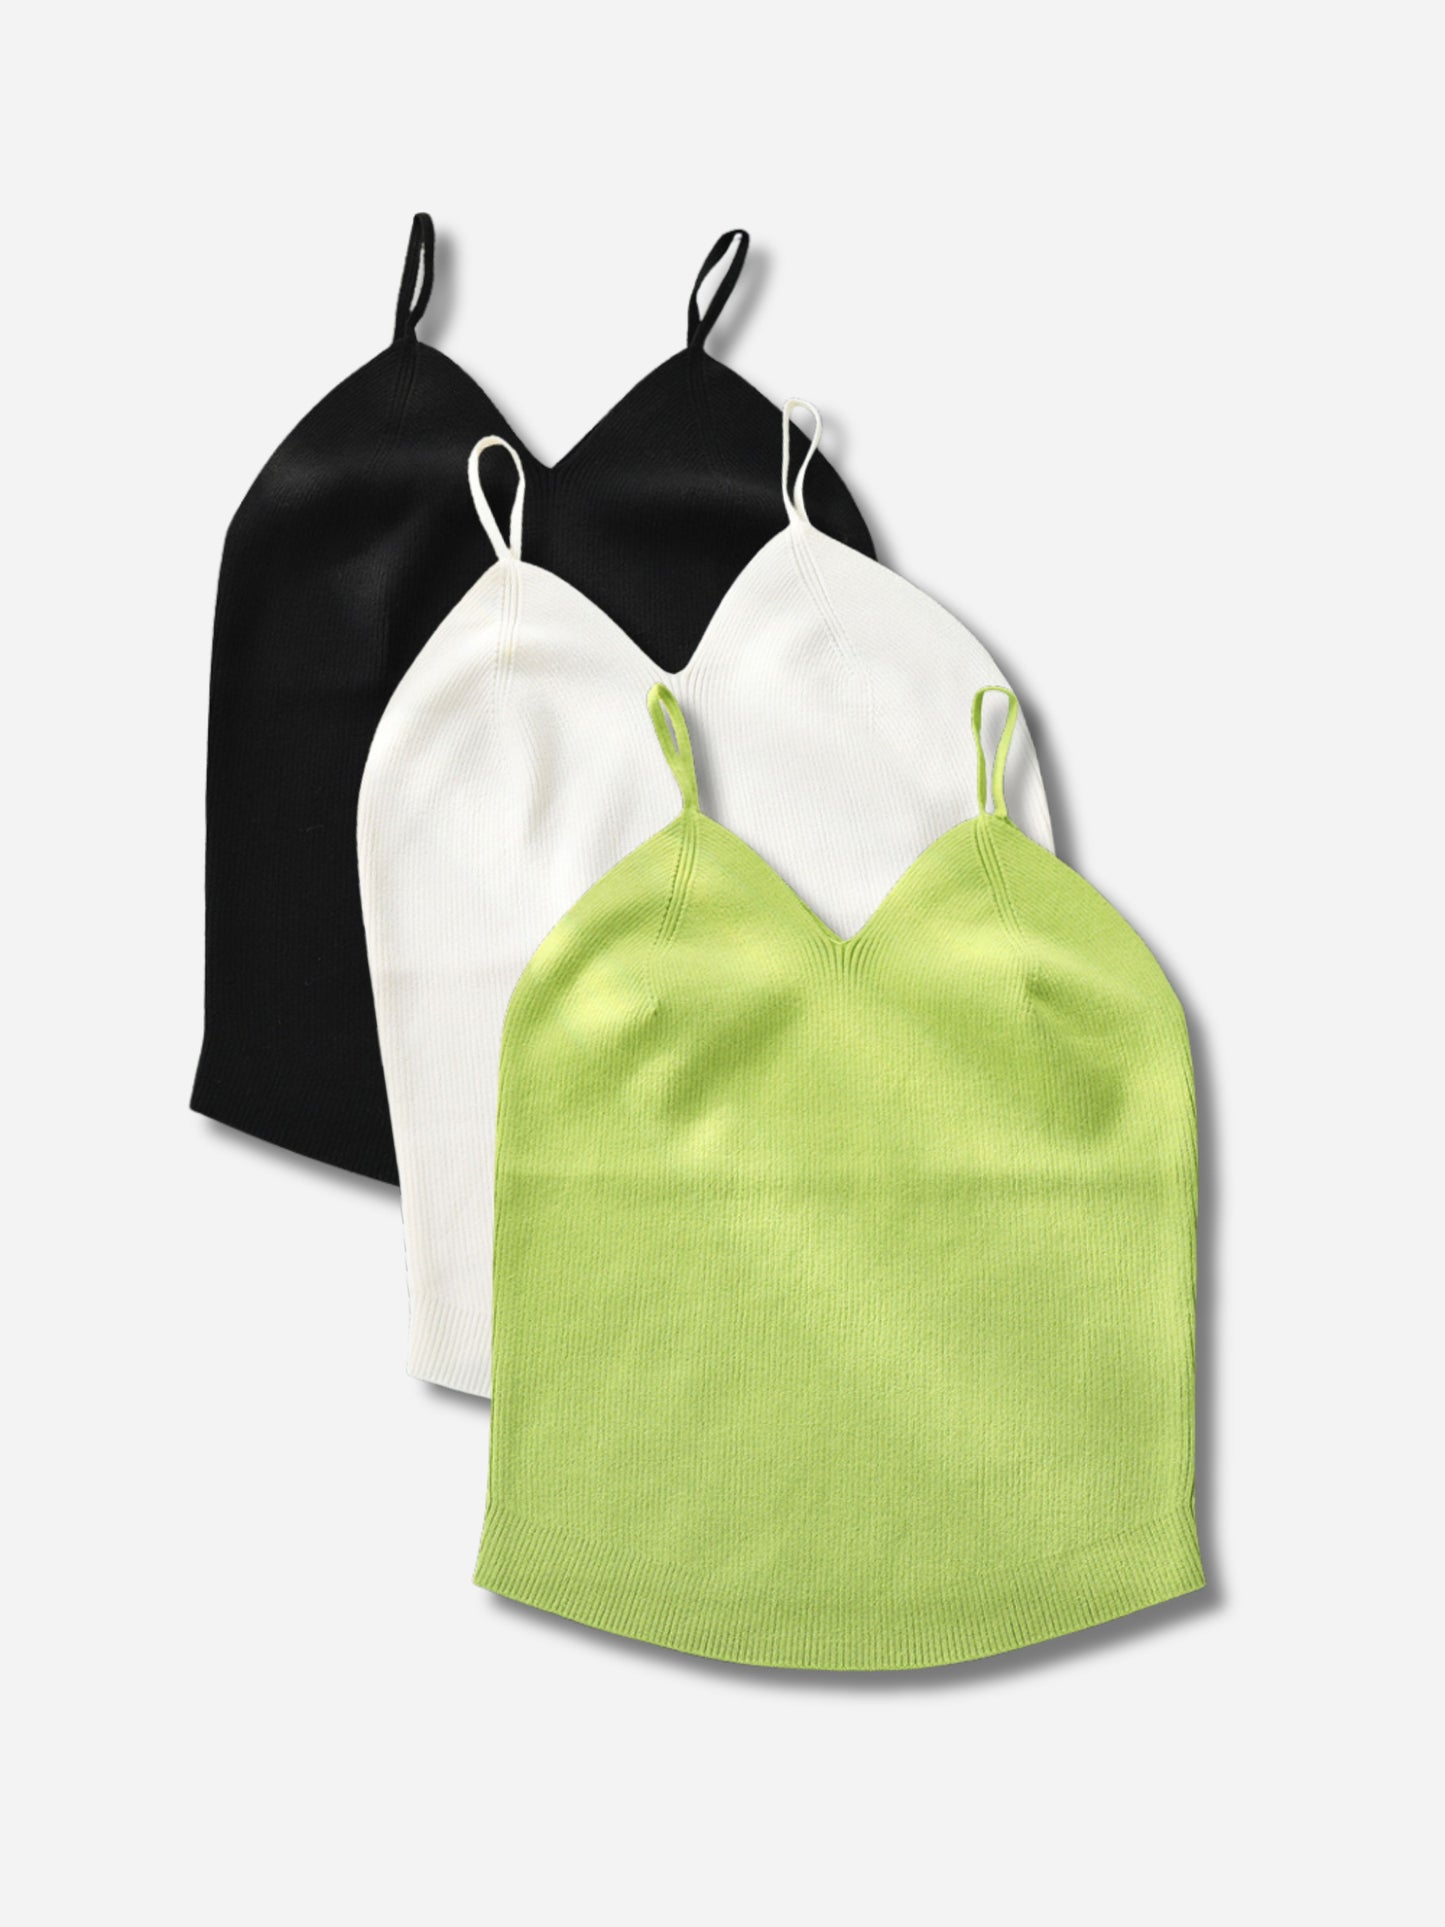 Stylish Woolen Sleeveless Cotton Tank Tops For Women And Girls,Pack Of 3, Multicolor